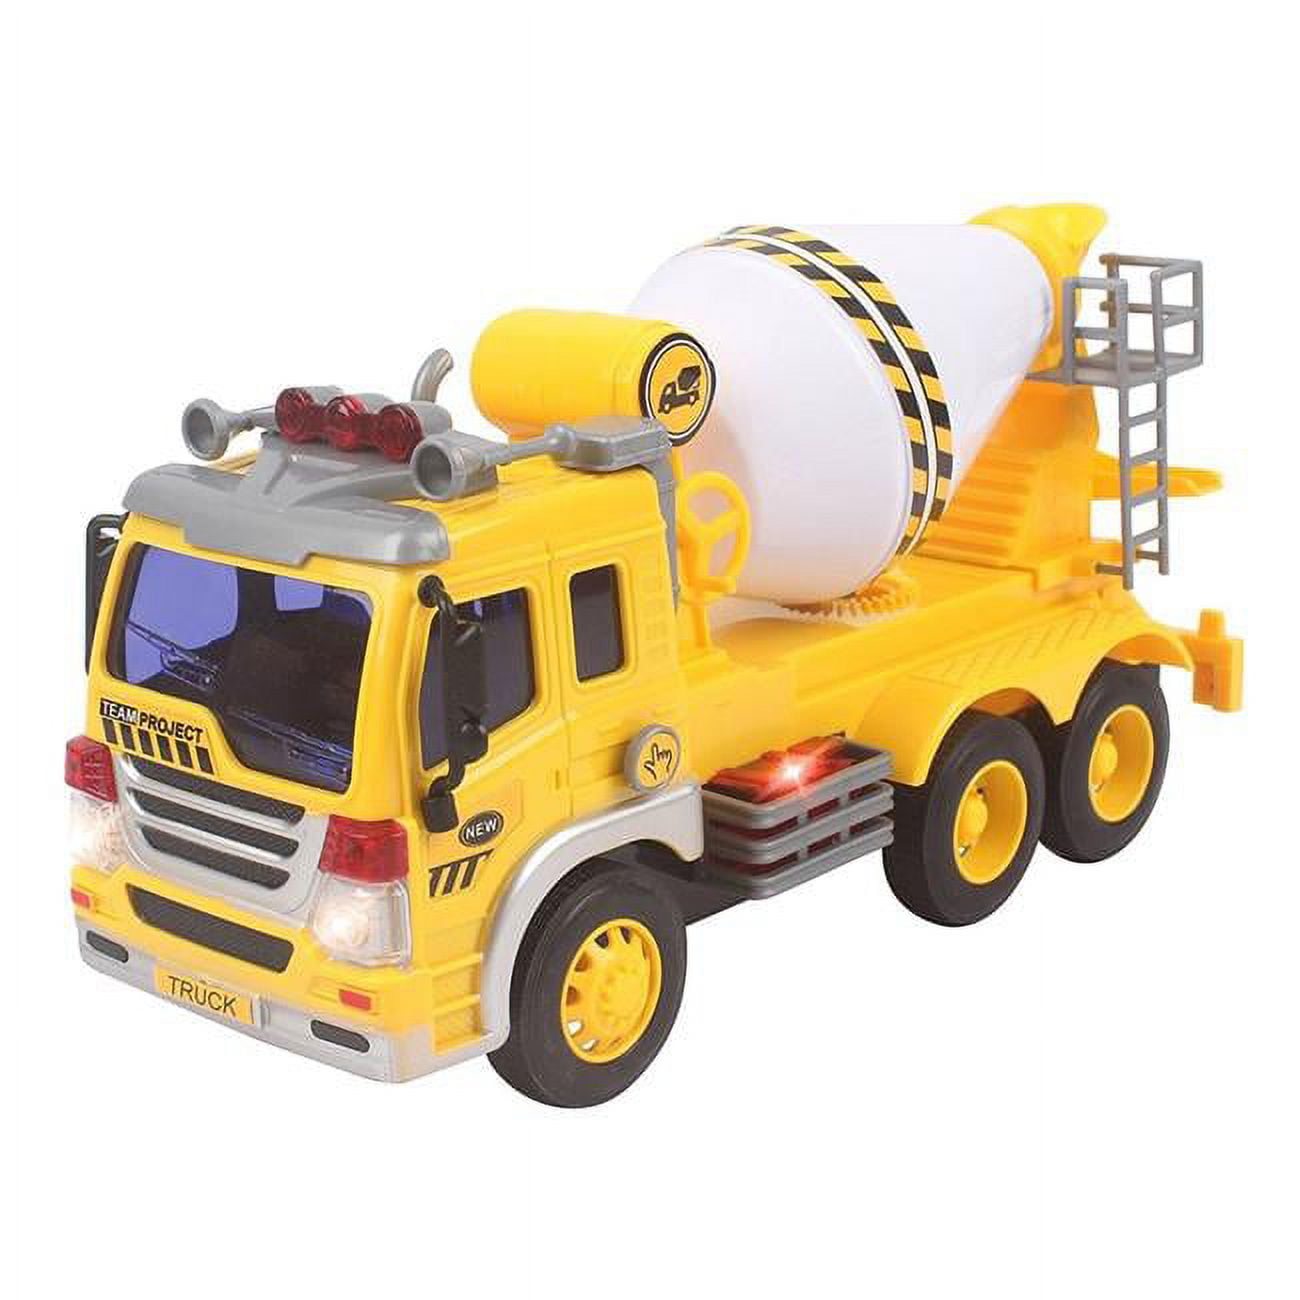 Ps302s Friction Powered Cement Mixer Truck Toy